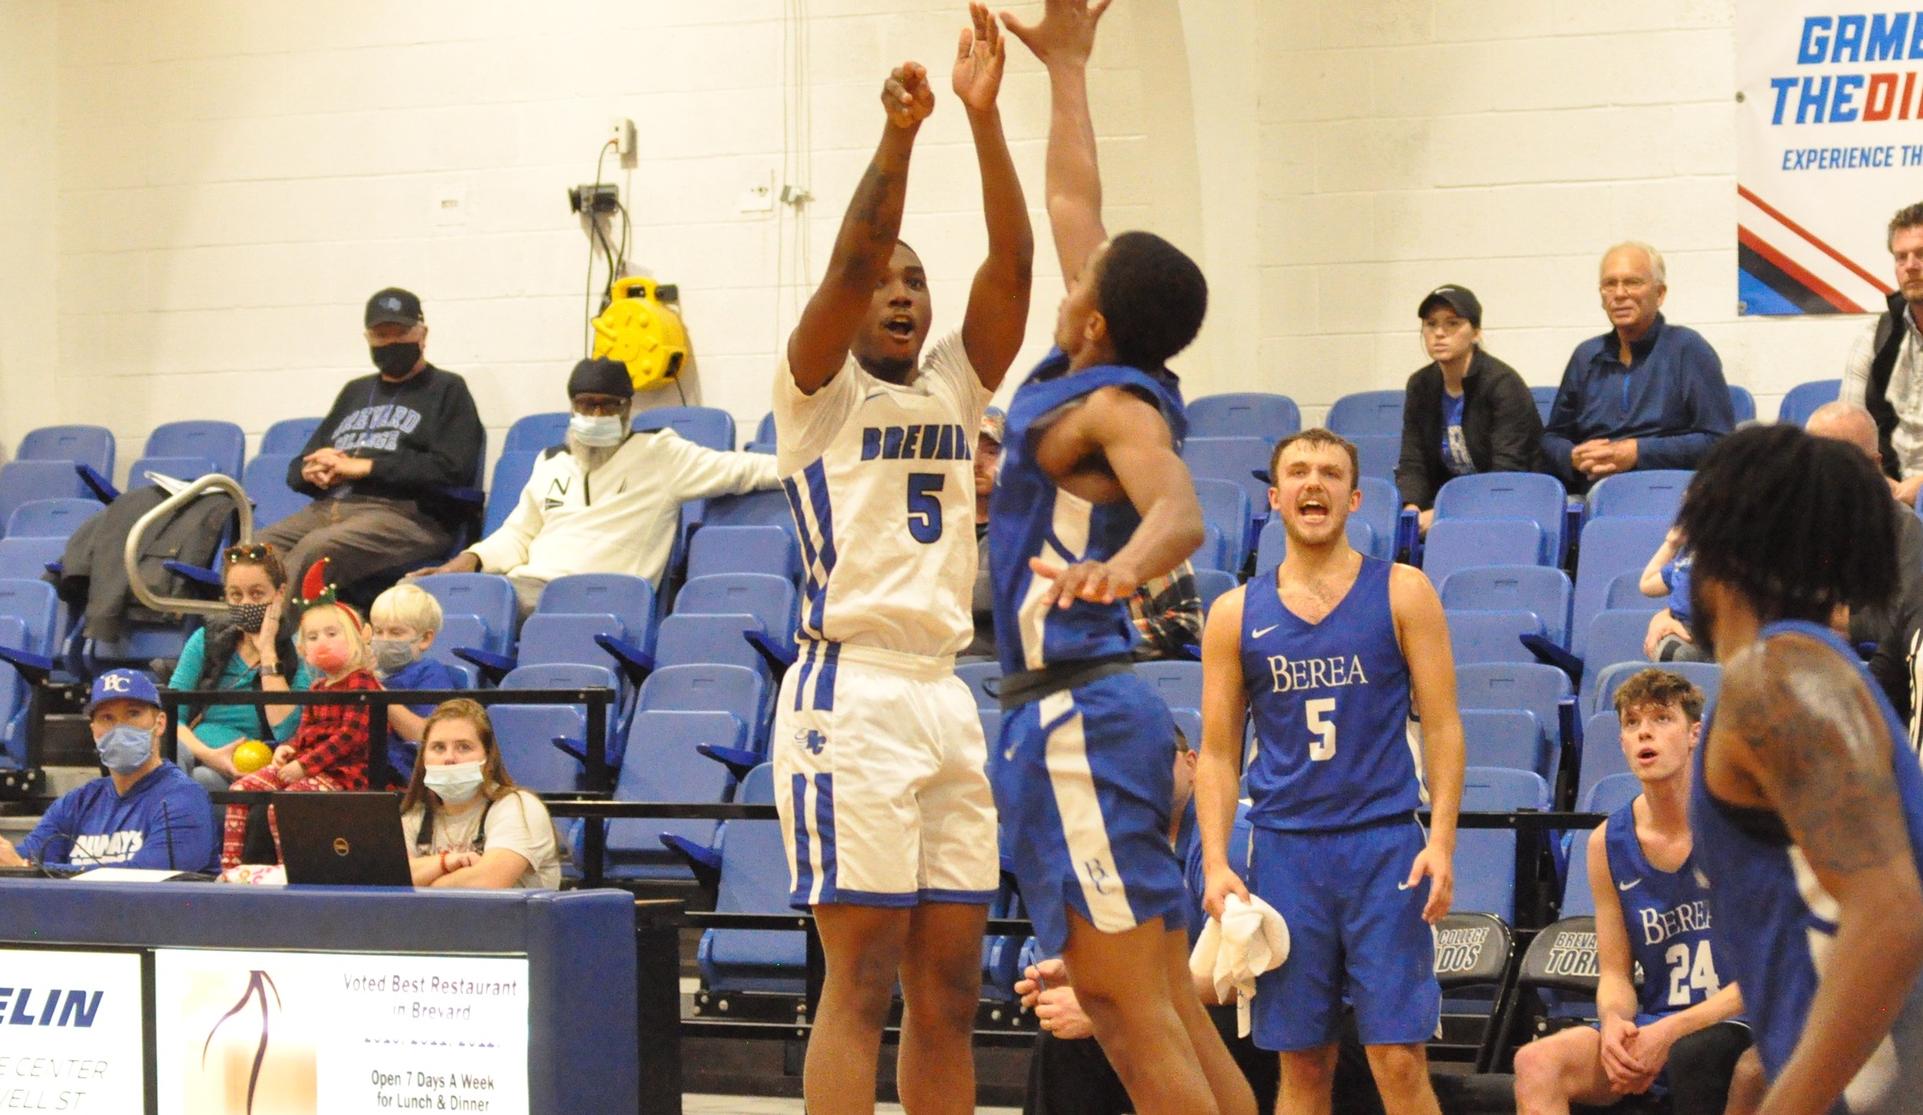 Sophomore LB Boyette scored a career-high 31 points as Brevard claimed a double-overtime thriller over Berea, 104-98 (Photo courtesy of Tommy Moss)